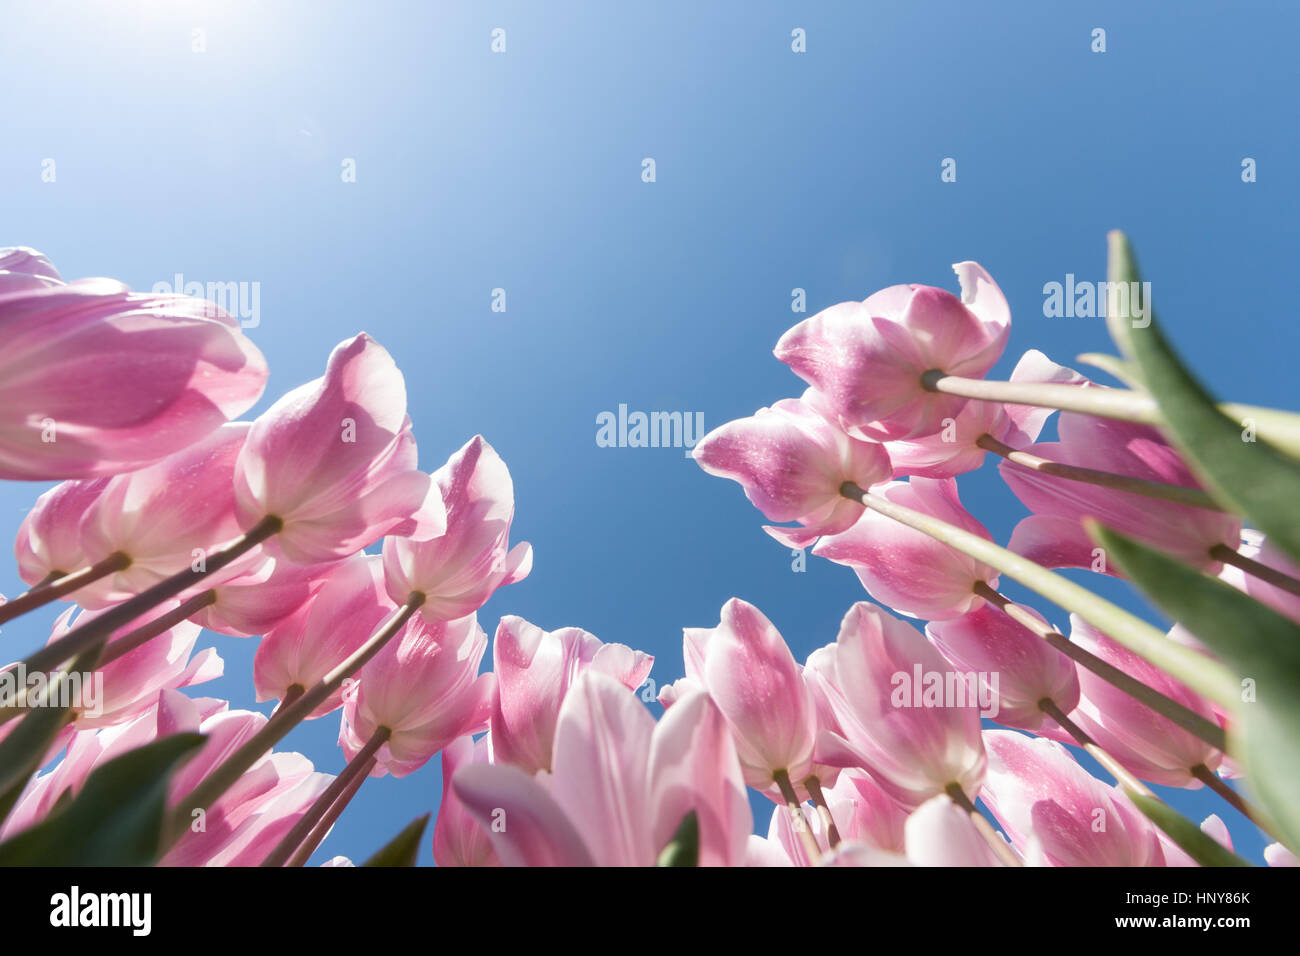 Beautiful bouquet of tulips. colorful tulips. tulips in spring sun. tulip in the field Stock Photo